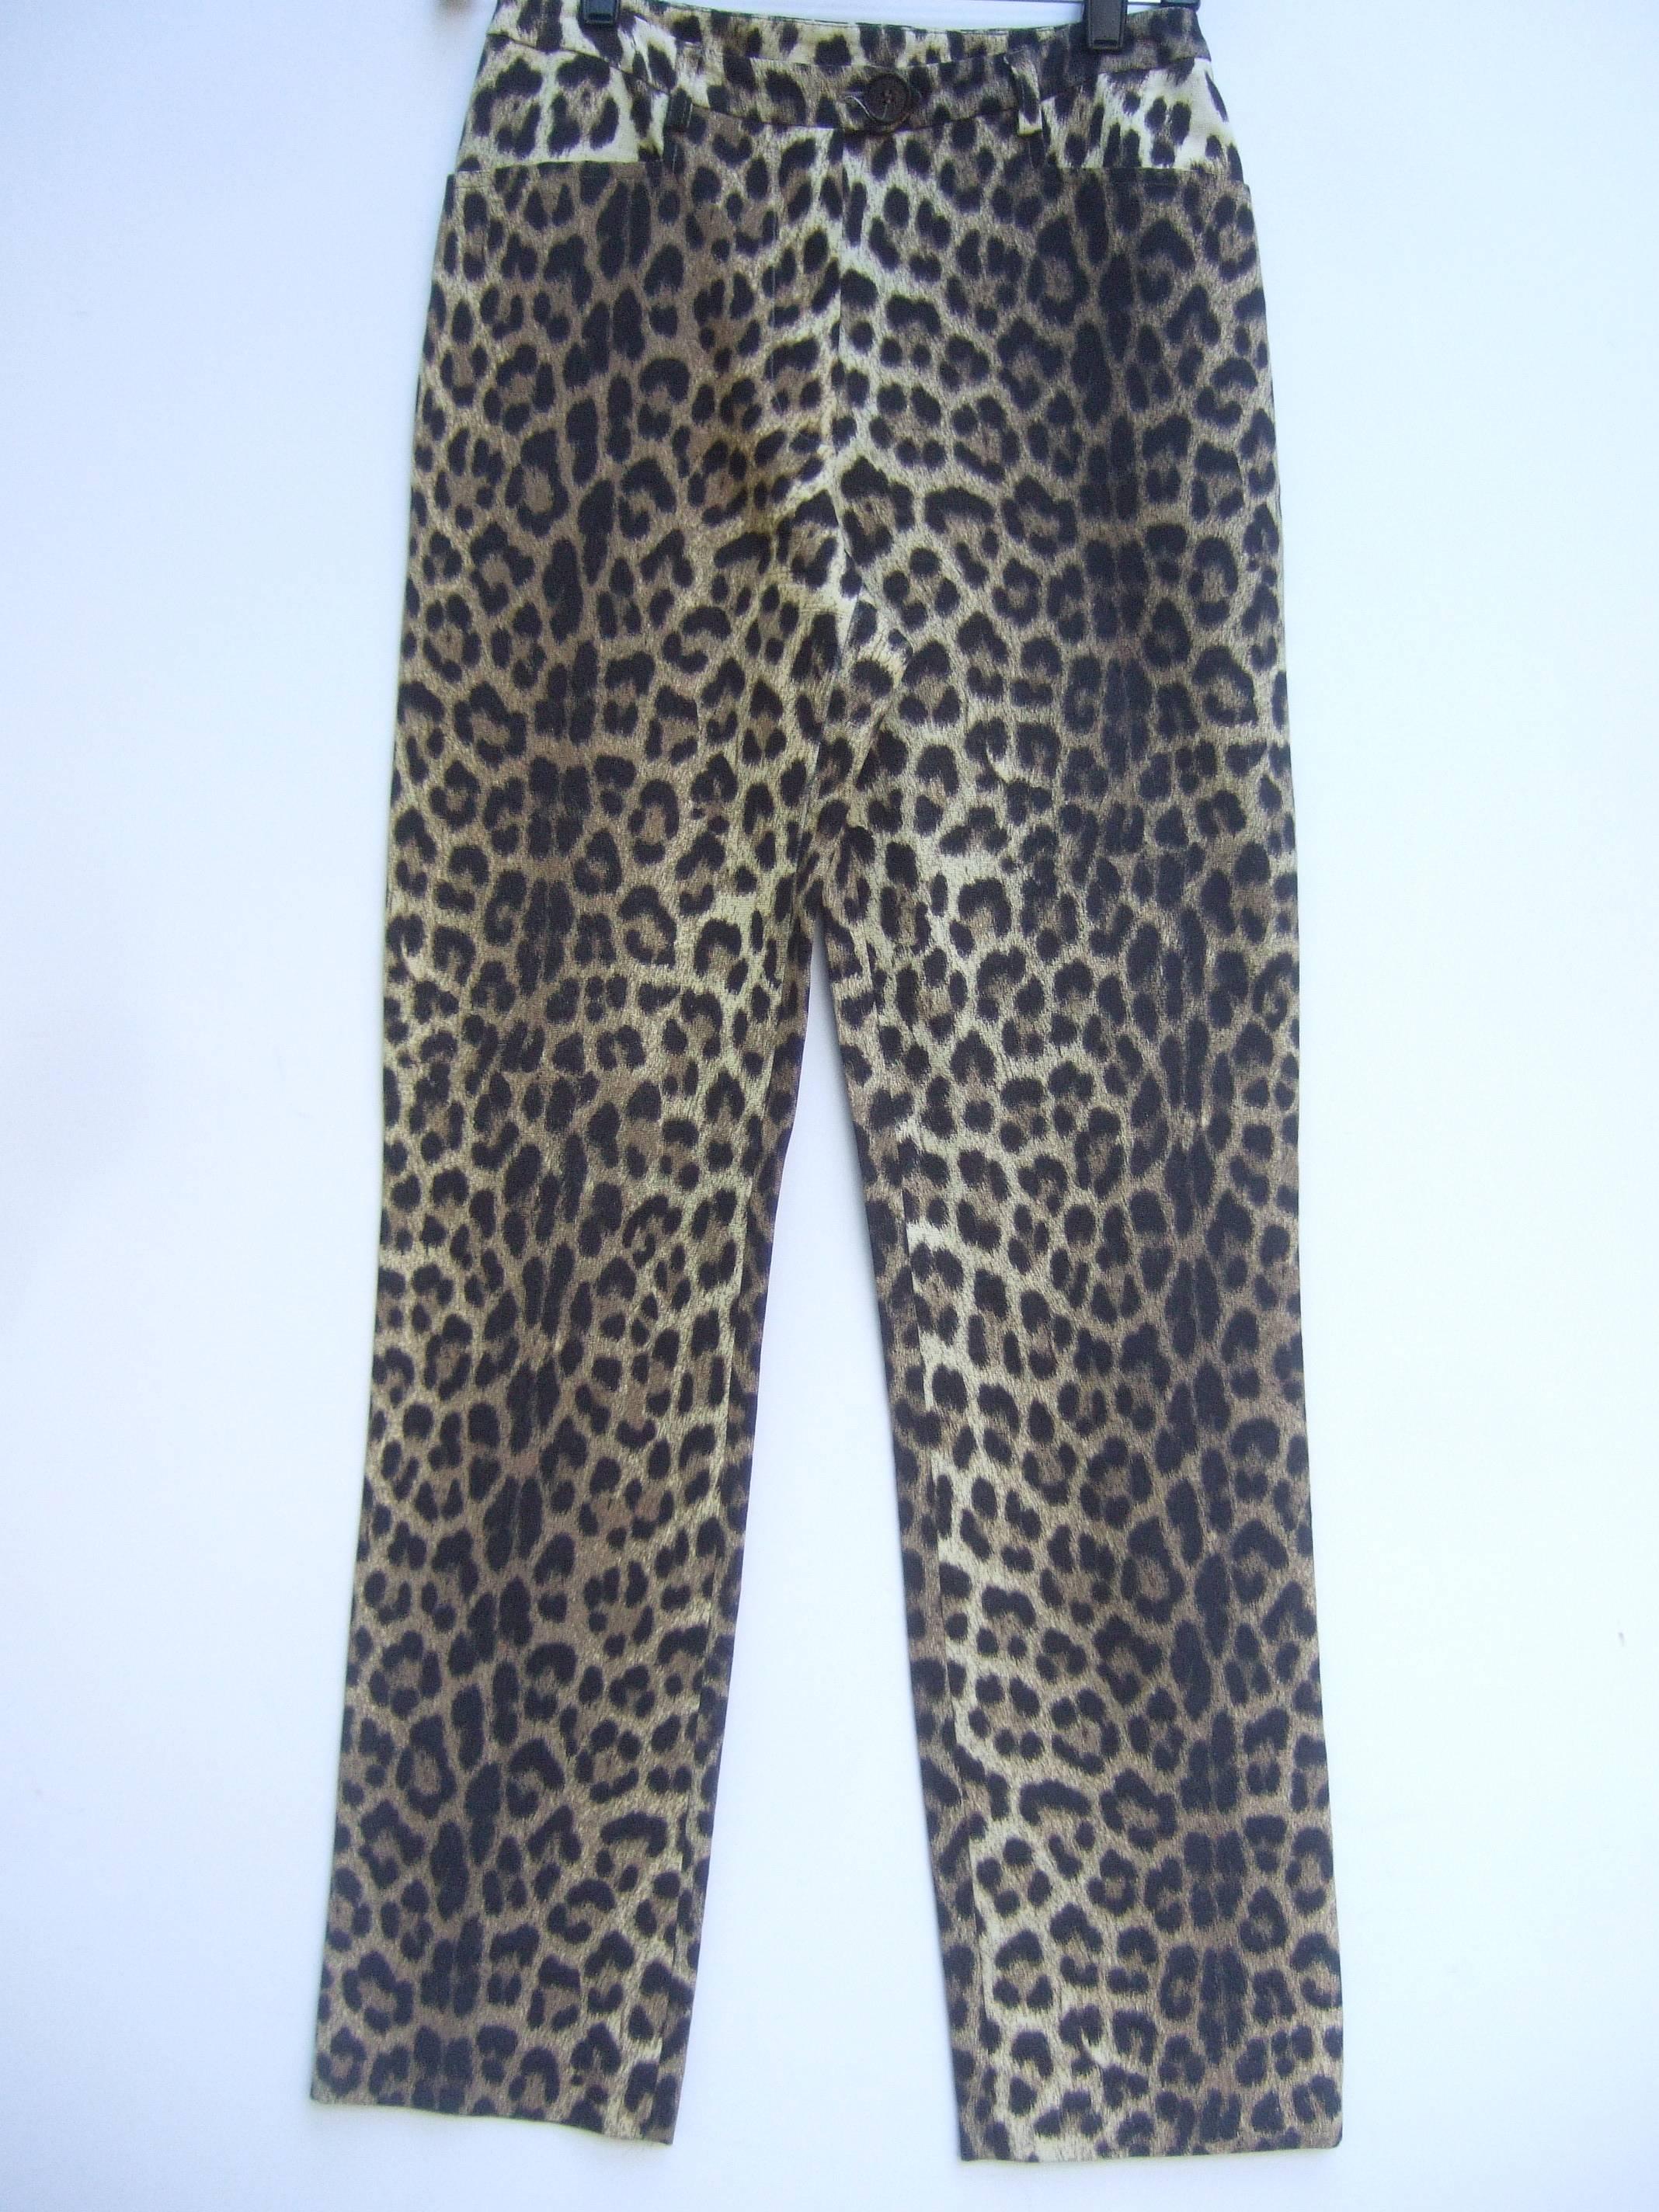 Moschino Cheap & Chic Leopard print jeans US Size 6 
The trendy animal print jeans are designed with two 
front hip pockets

The brown resin waist button is stamped Cheap & Chic 

Labeled: Cheap and Chic by Moschino 
Made in Italy 

US Size